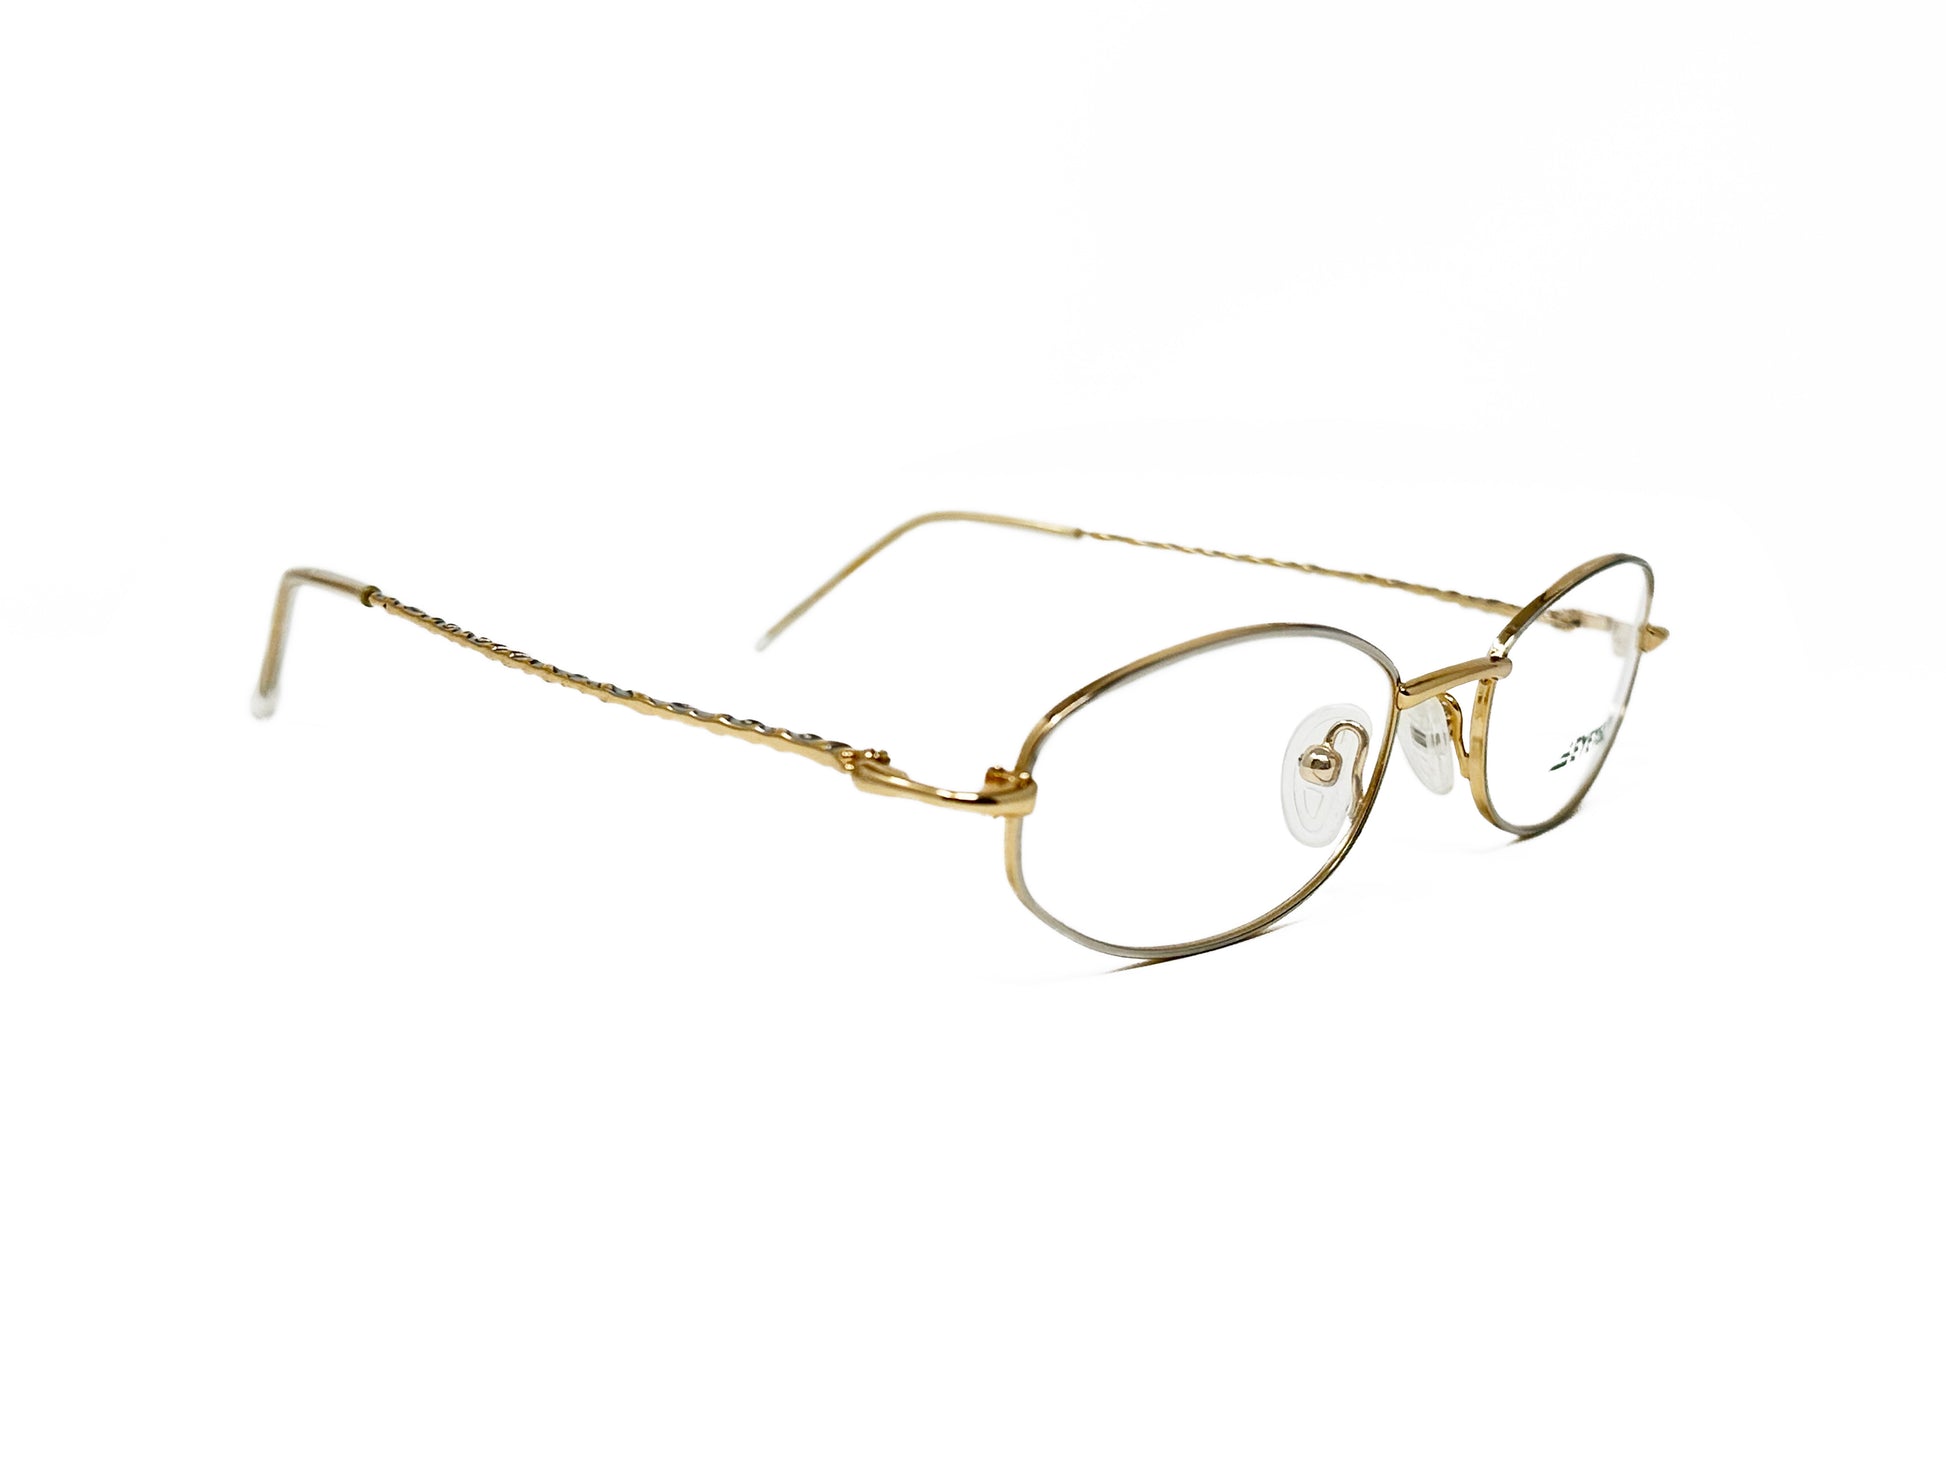 Eyetel oval, with slight angles, metal optical frame. Model: Bach. Color: 425 - White gold. Side view.